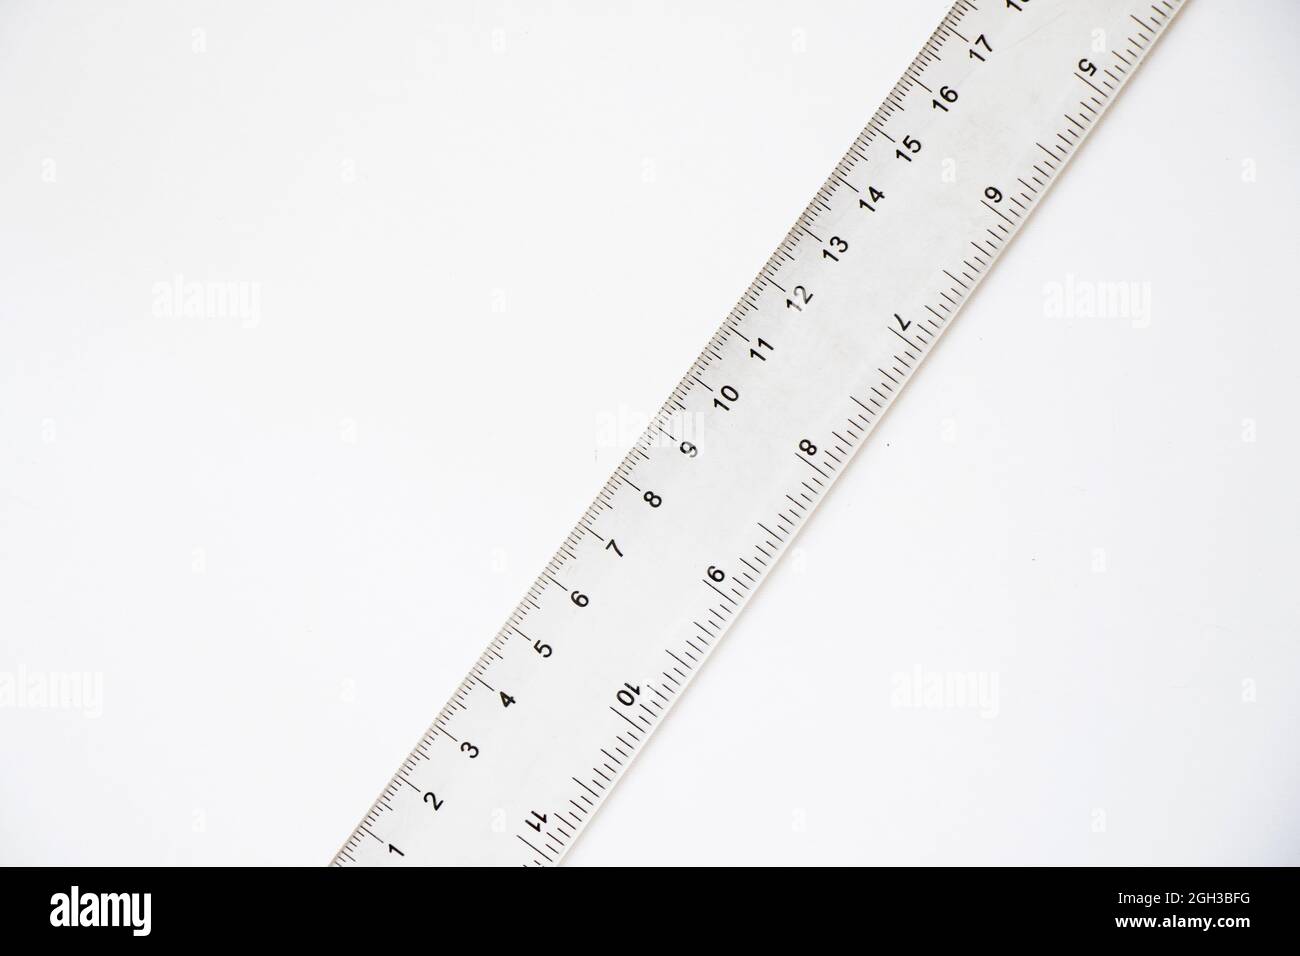 30cm Clear Ruler by First Stat - School Office Rule Inches Cm for